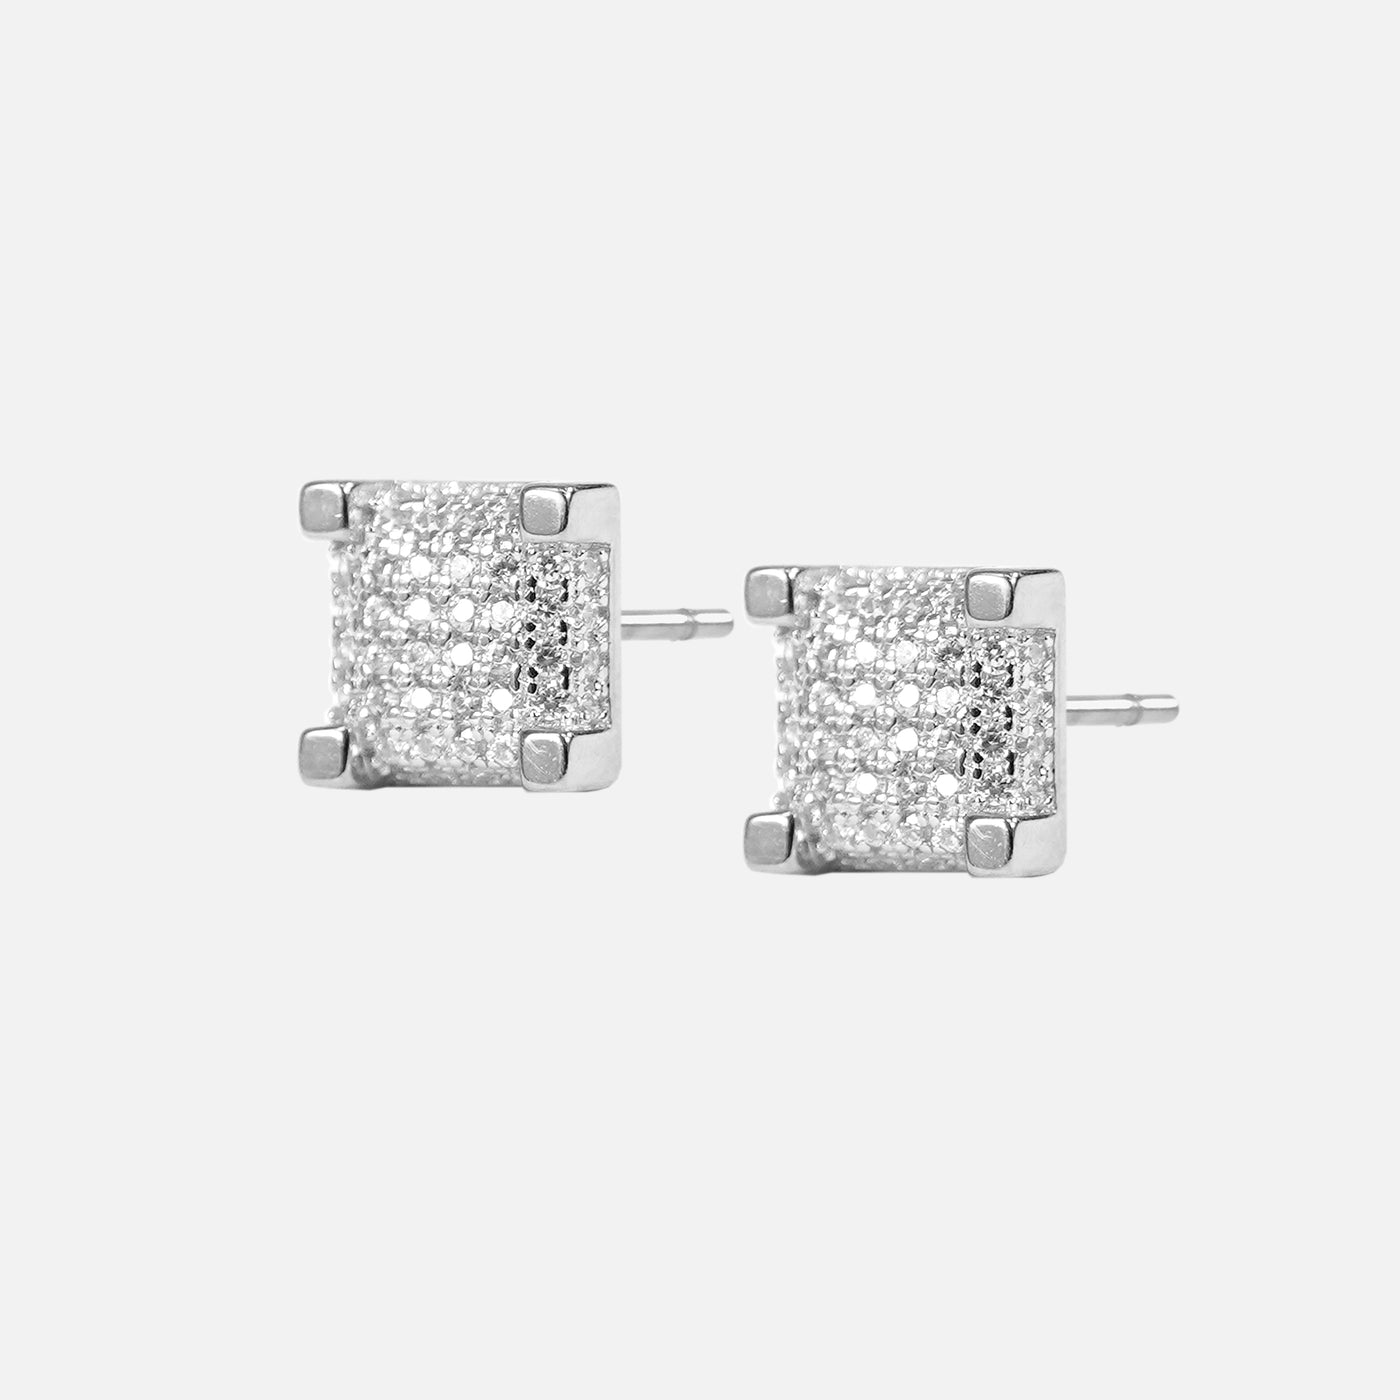 Iced Out Box 8mm Earrings Sterling Silver